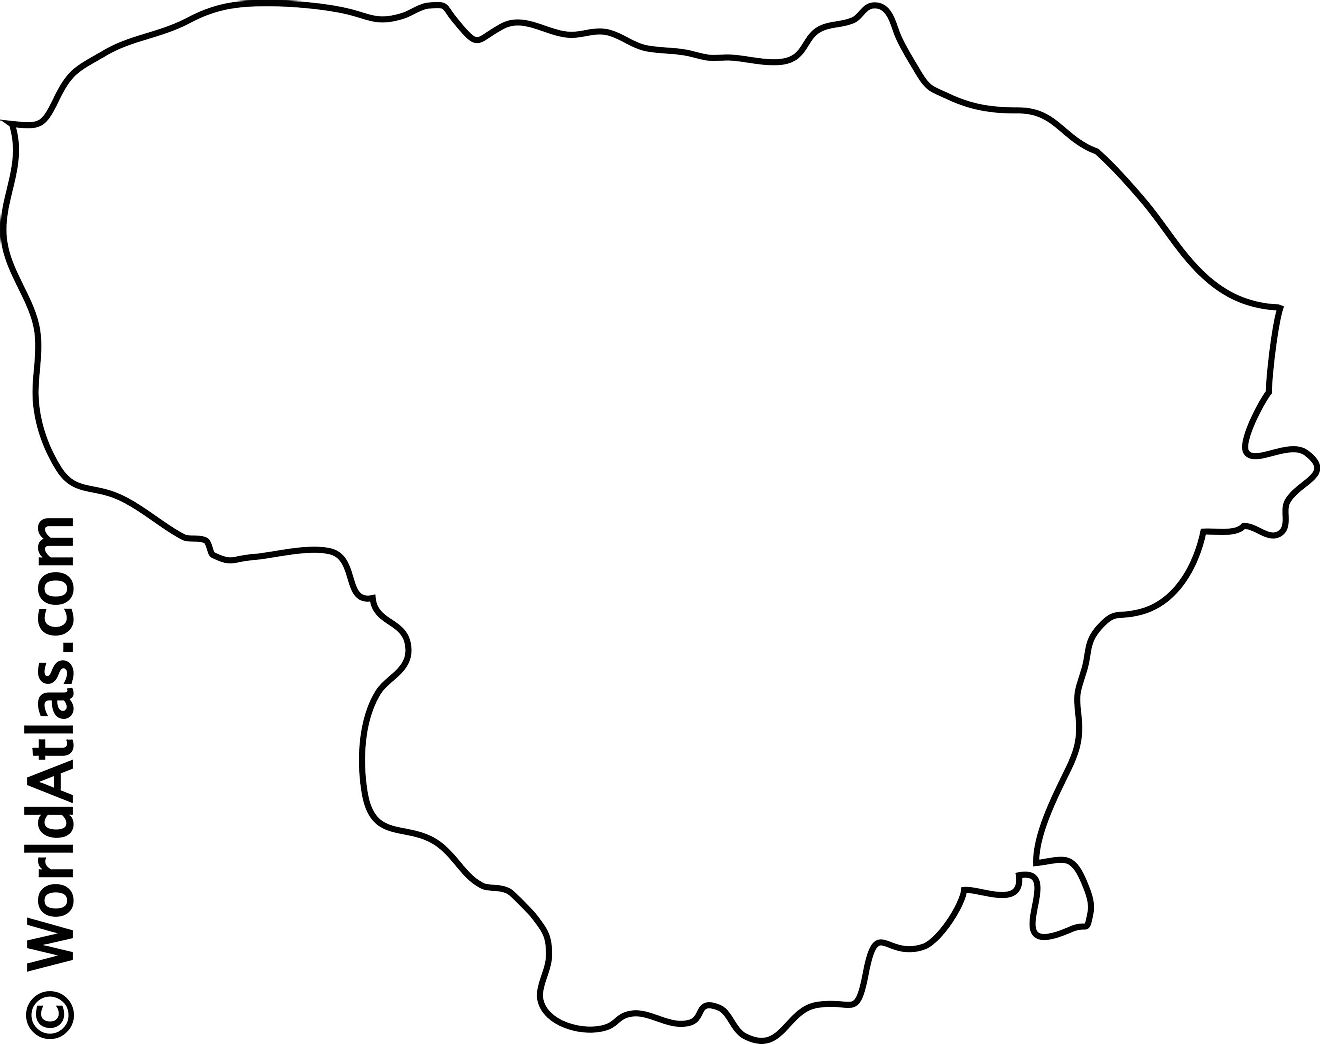 Blank Outline Map of Lithuania